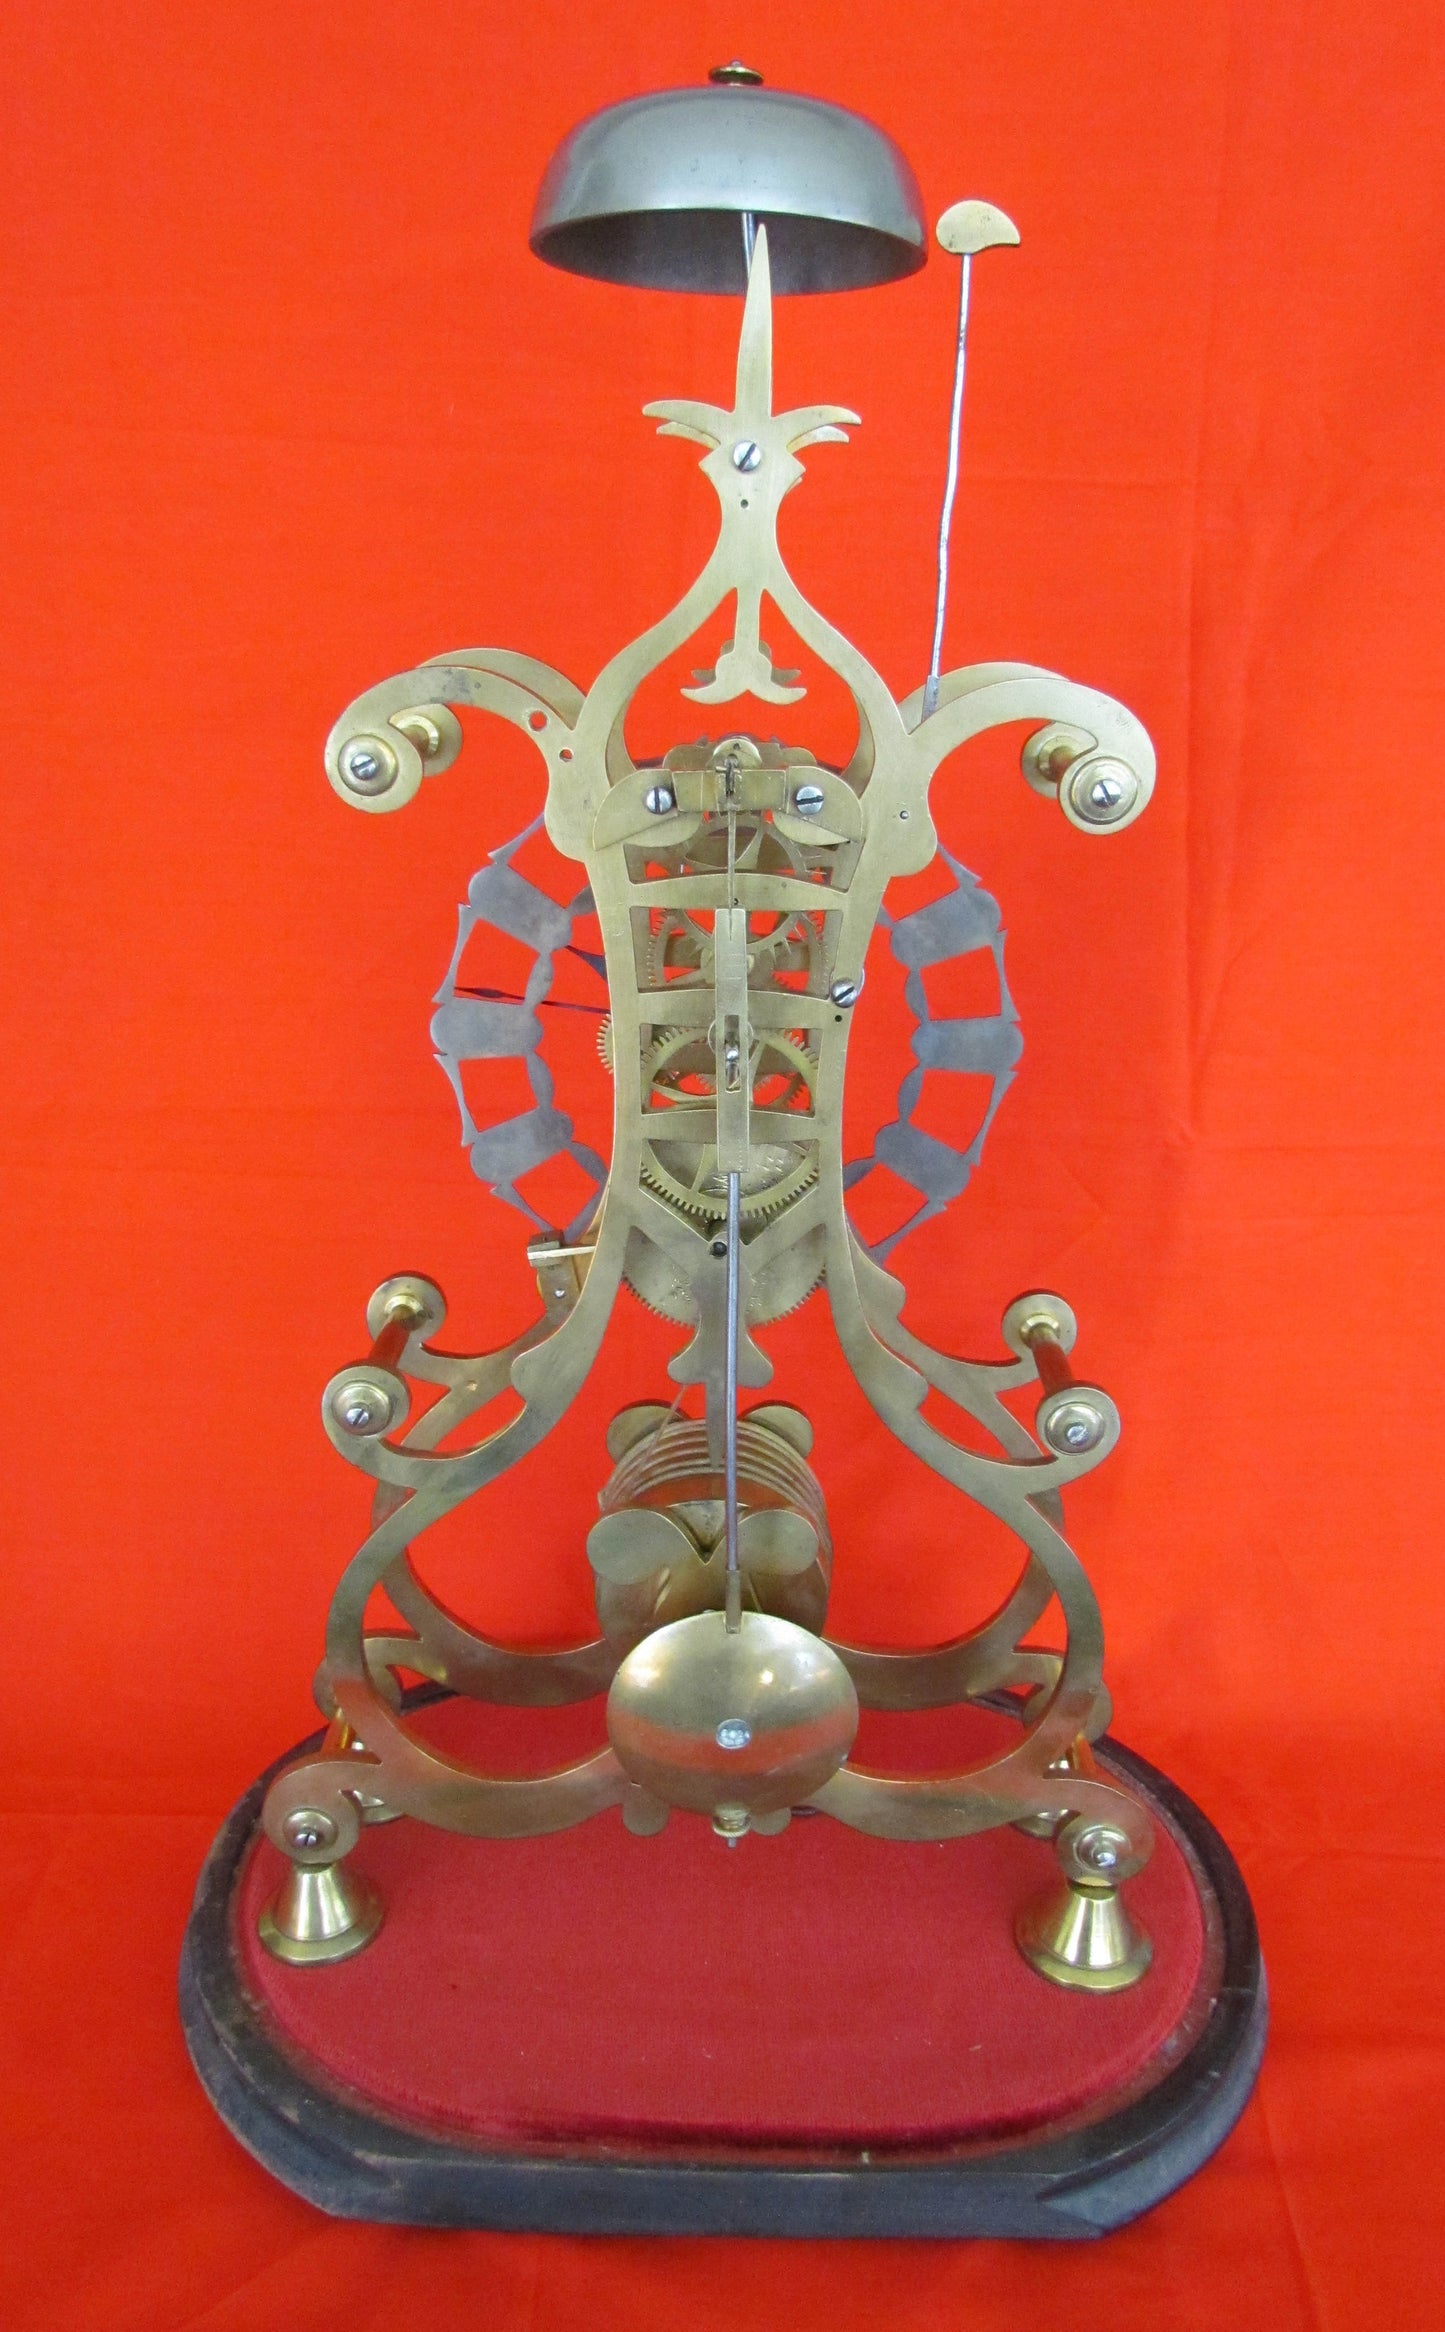 Early 19th Century Skeleton Clock Under Original Glass Dome